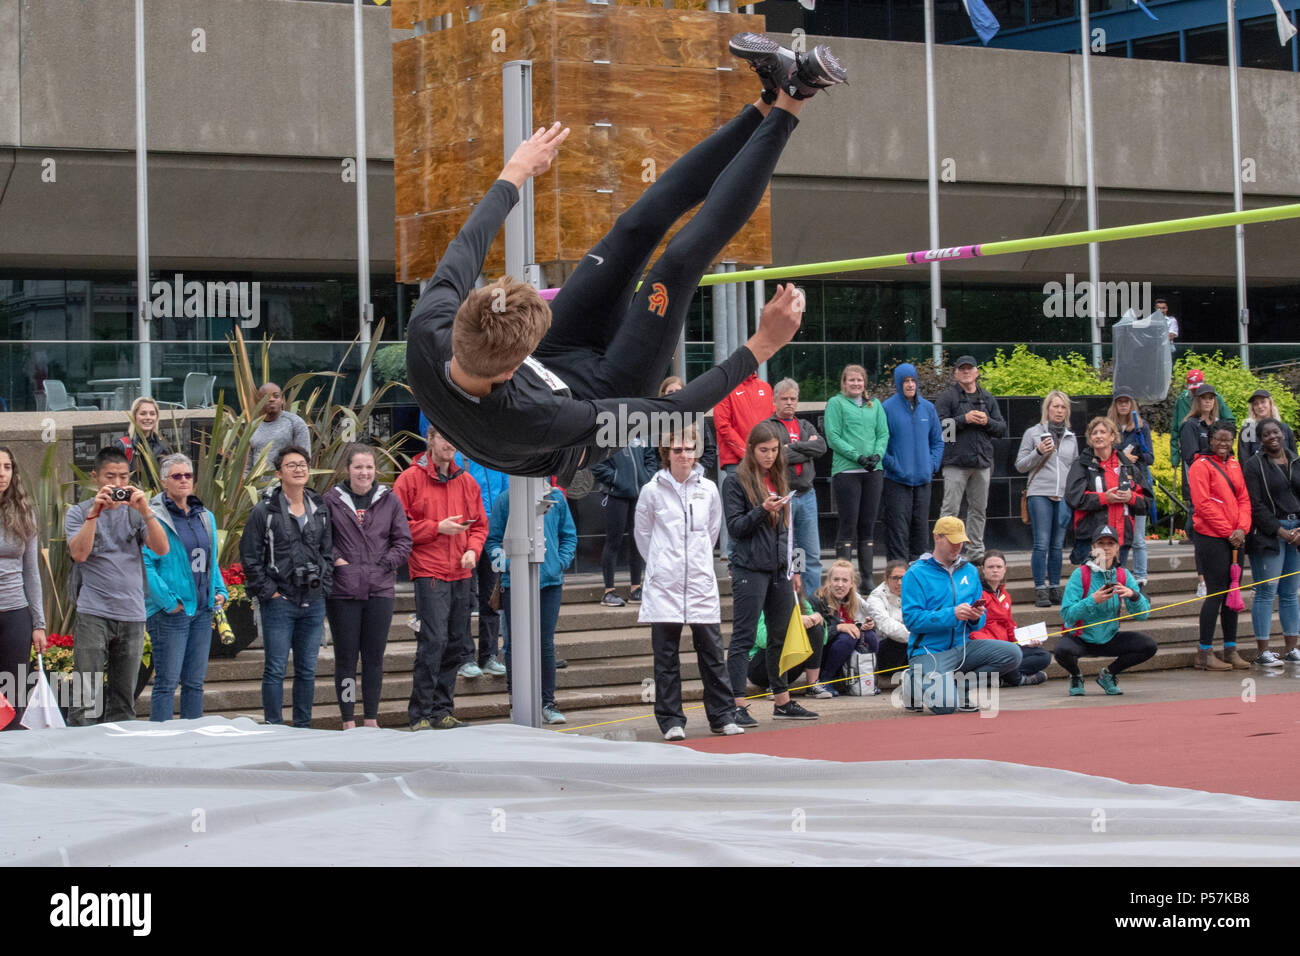 June 23, 2018; Men's High Jump at the Track Takeover, Olympic Plaza, Downtown Calgary, Alberta, Canada. Stock Photo